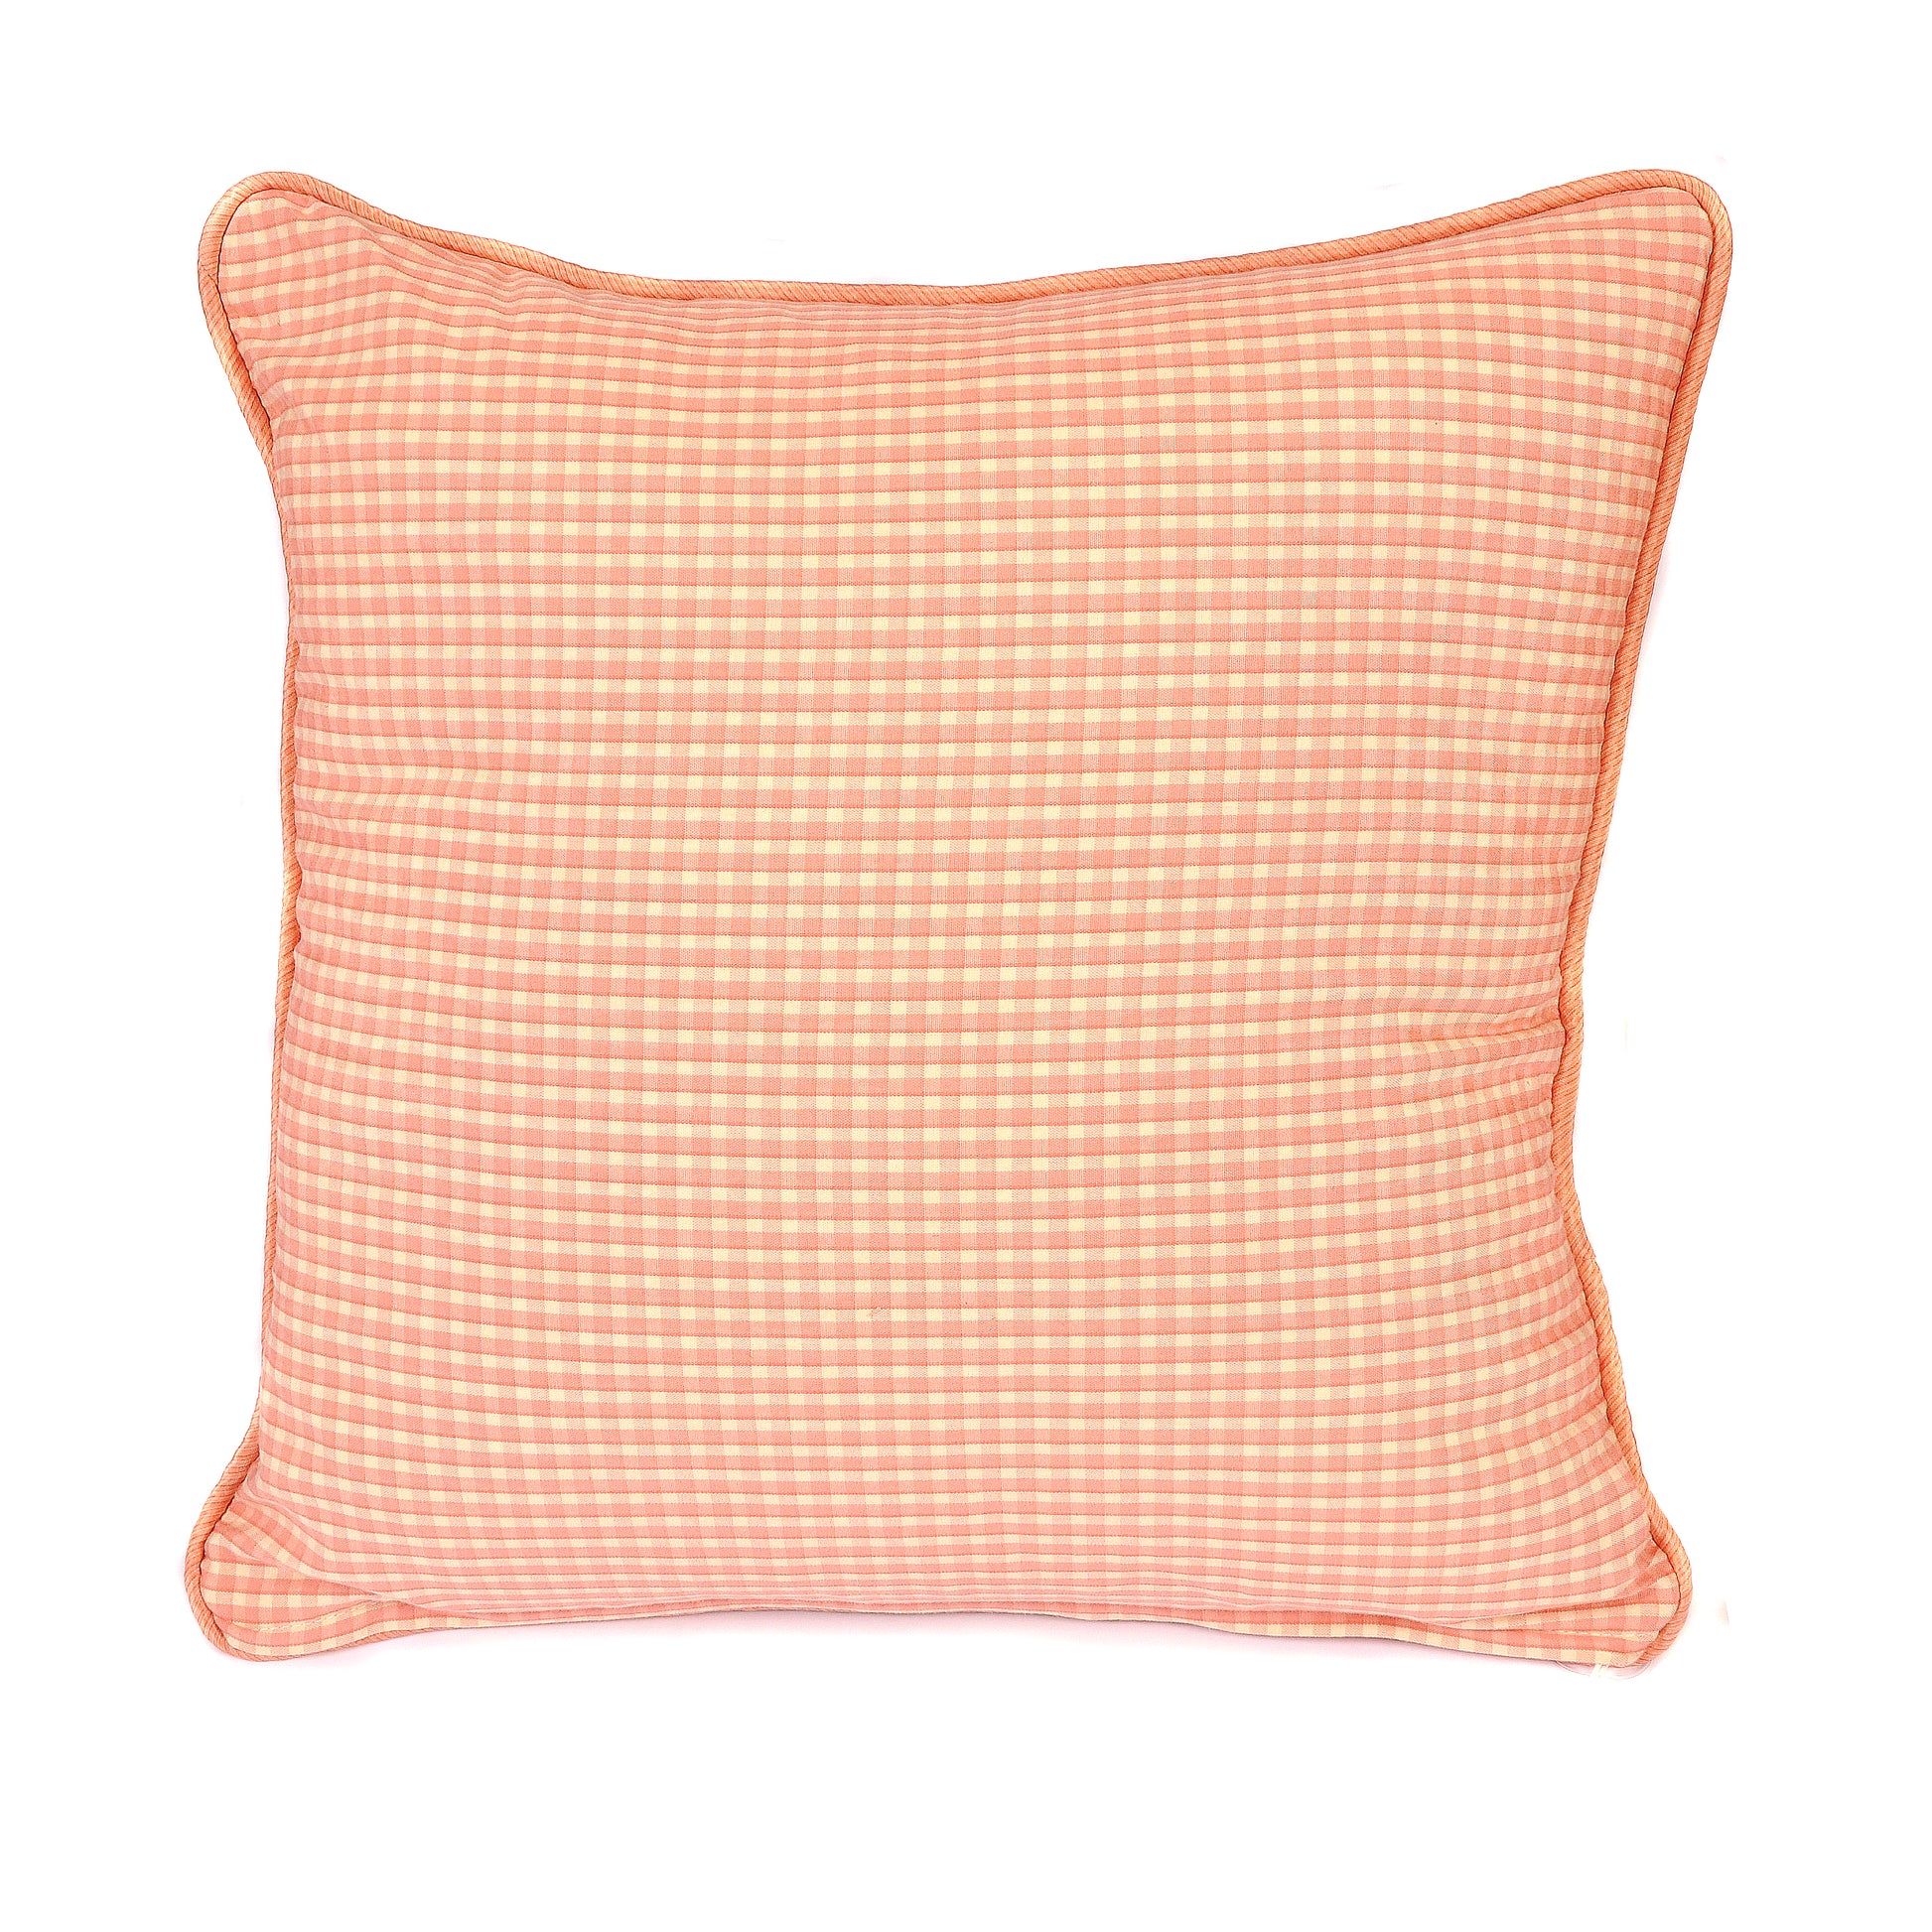 Indienne Cushion with Check Silk Back Joanna Wood Shop